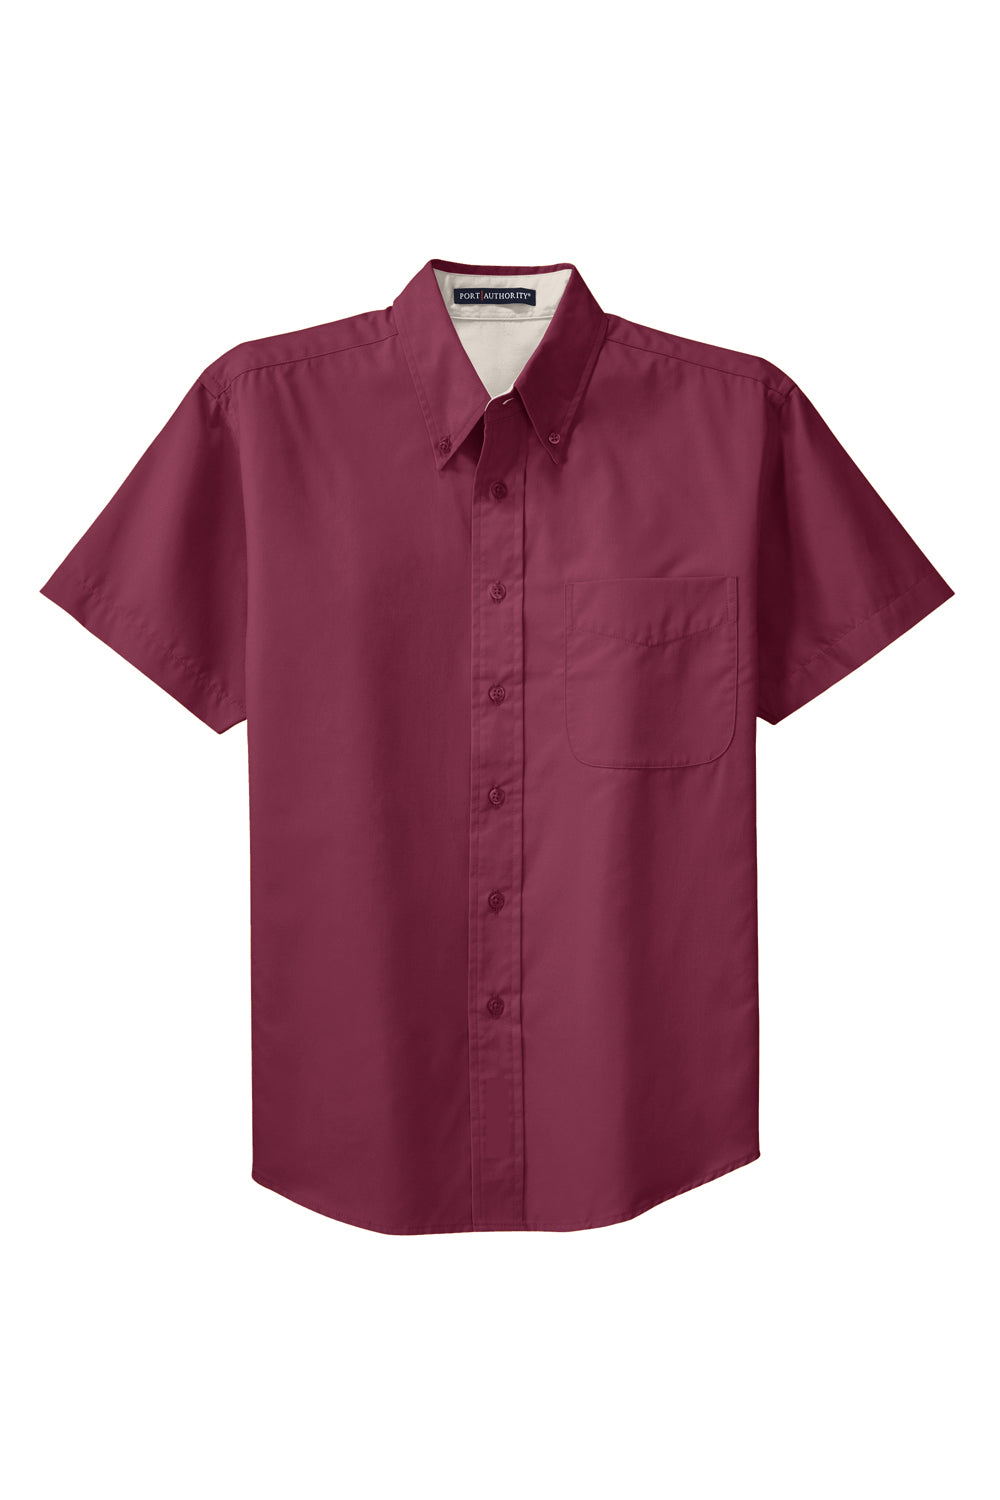 Port Authority S508/TLS508 Mens Easy Care Wrinkle Resistant Short Sleeve Button Down Shirt w/ Pocket Burgundy Flat Front